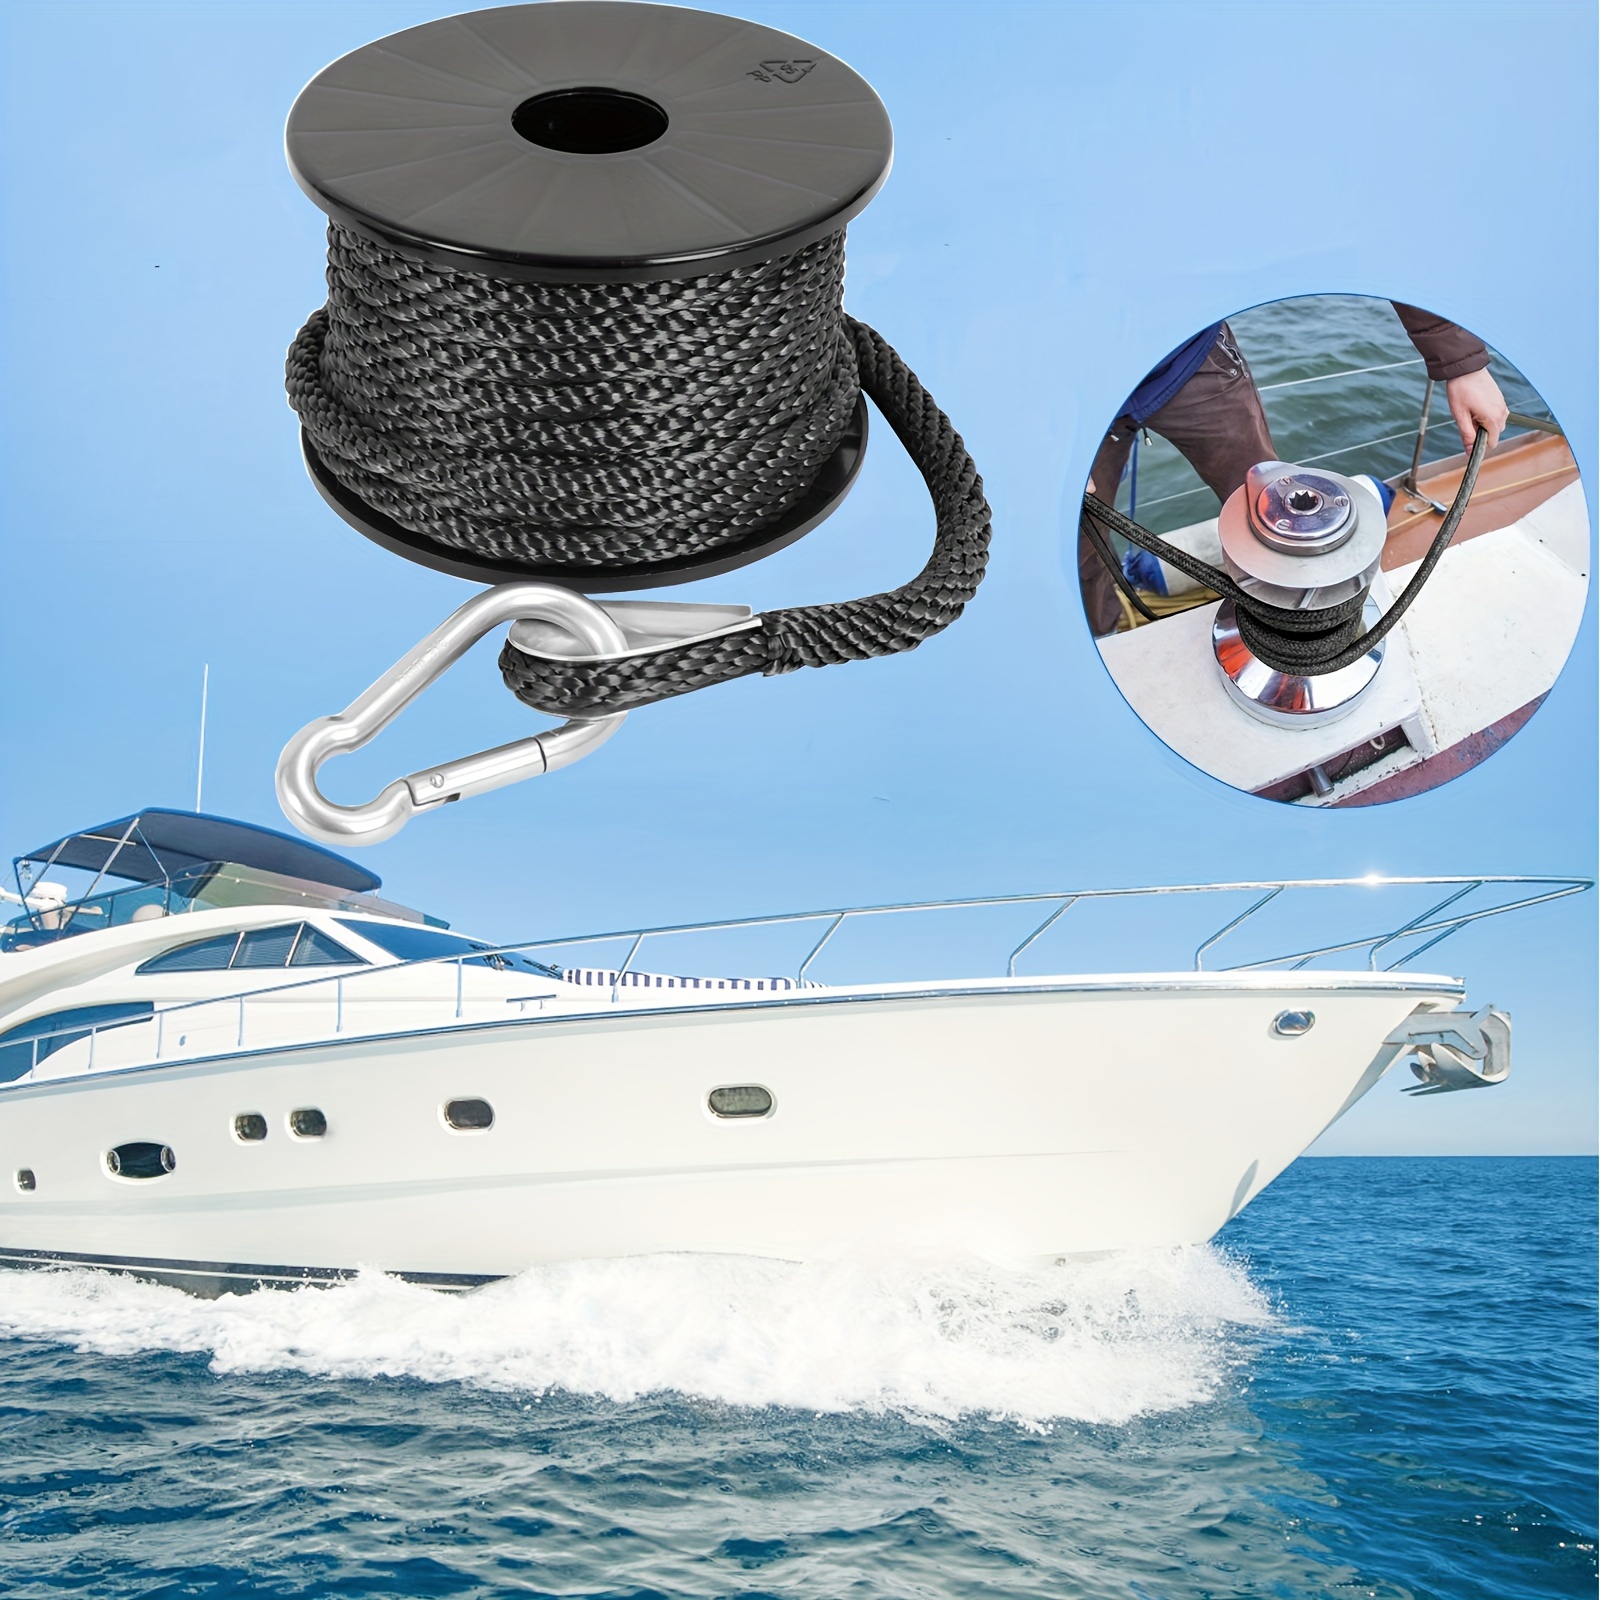 Double Braided Nylon Boat Anchor Rope With 316 Stainless Steel Heavy Duty  Carabiner Hook Length 50 100ft Diameter 3 8in Marine Grade Dock Rope, Shop  Now For Limited-time Deals